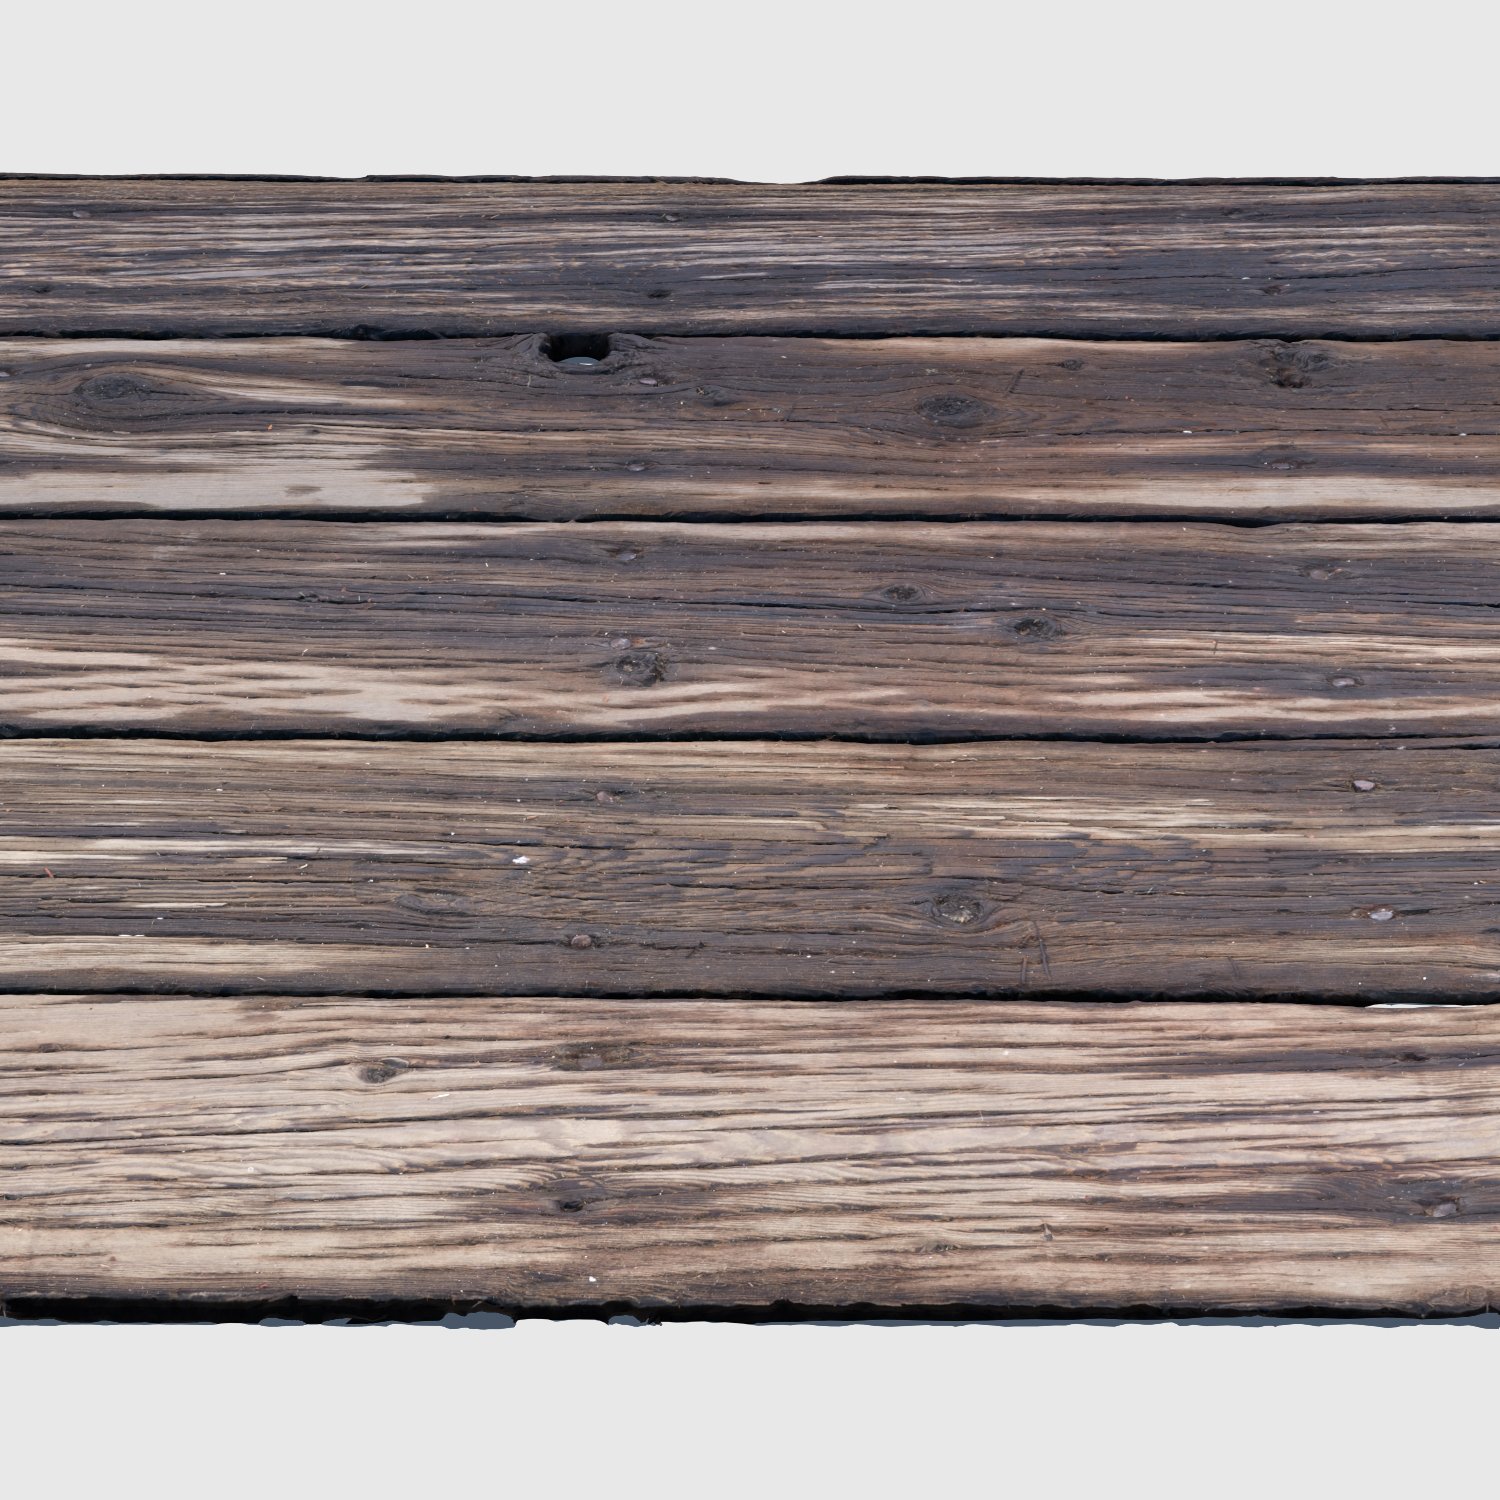 2,543,056 Wood Plank Images, Stock Photos, 3D objects, & Vectors